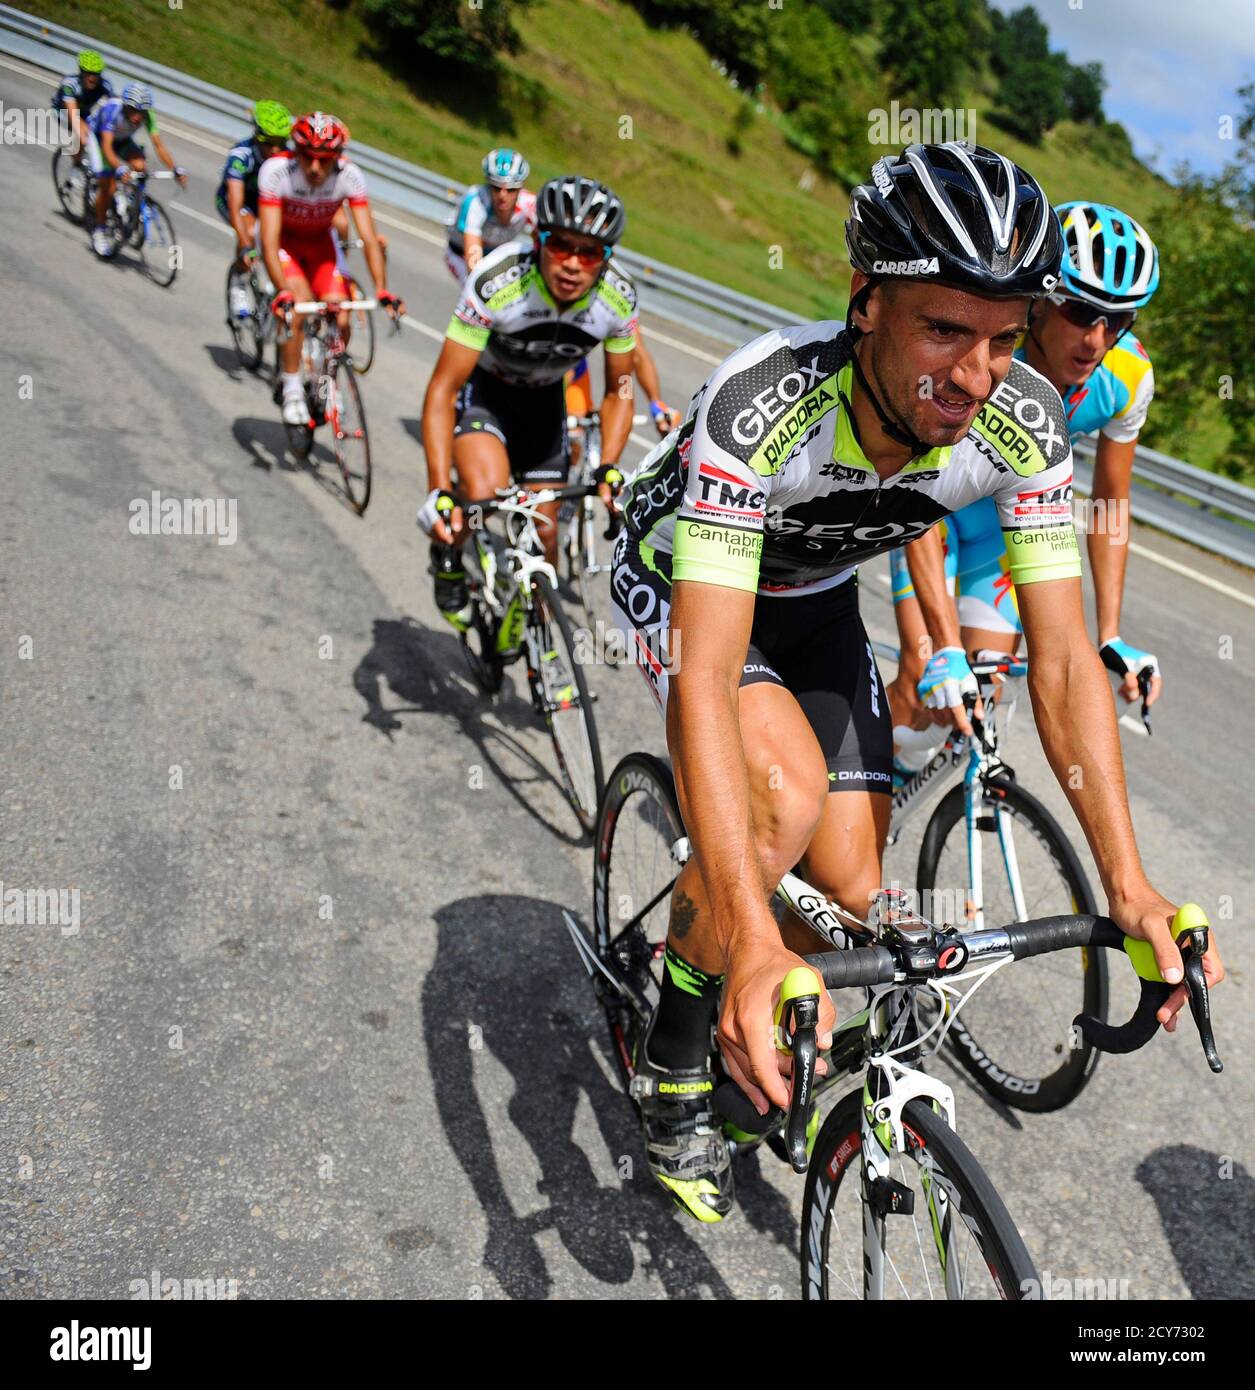 Geox TMC rider Juan Jose Cobo of Spain (R) cycles during the 15th stage of  the Tour of Spain 